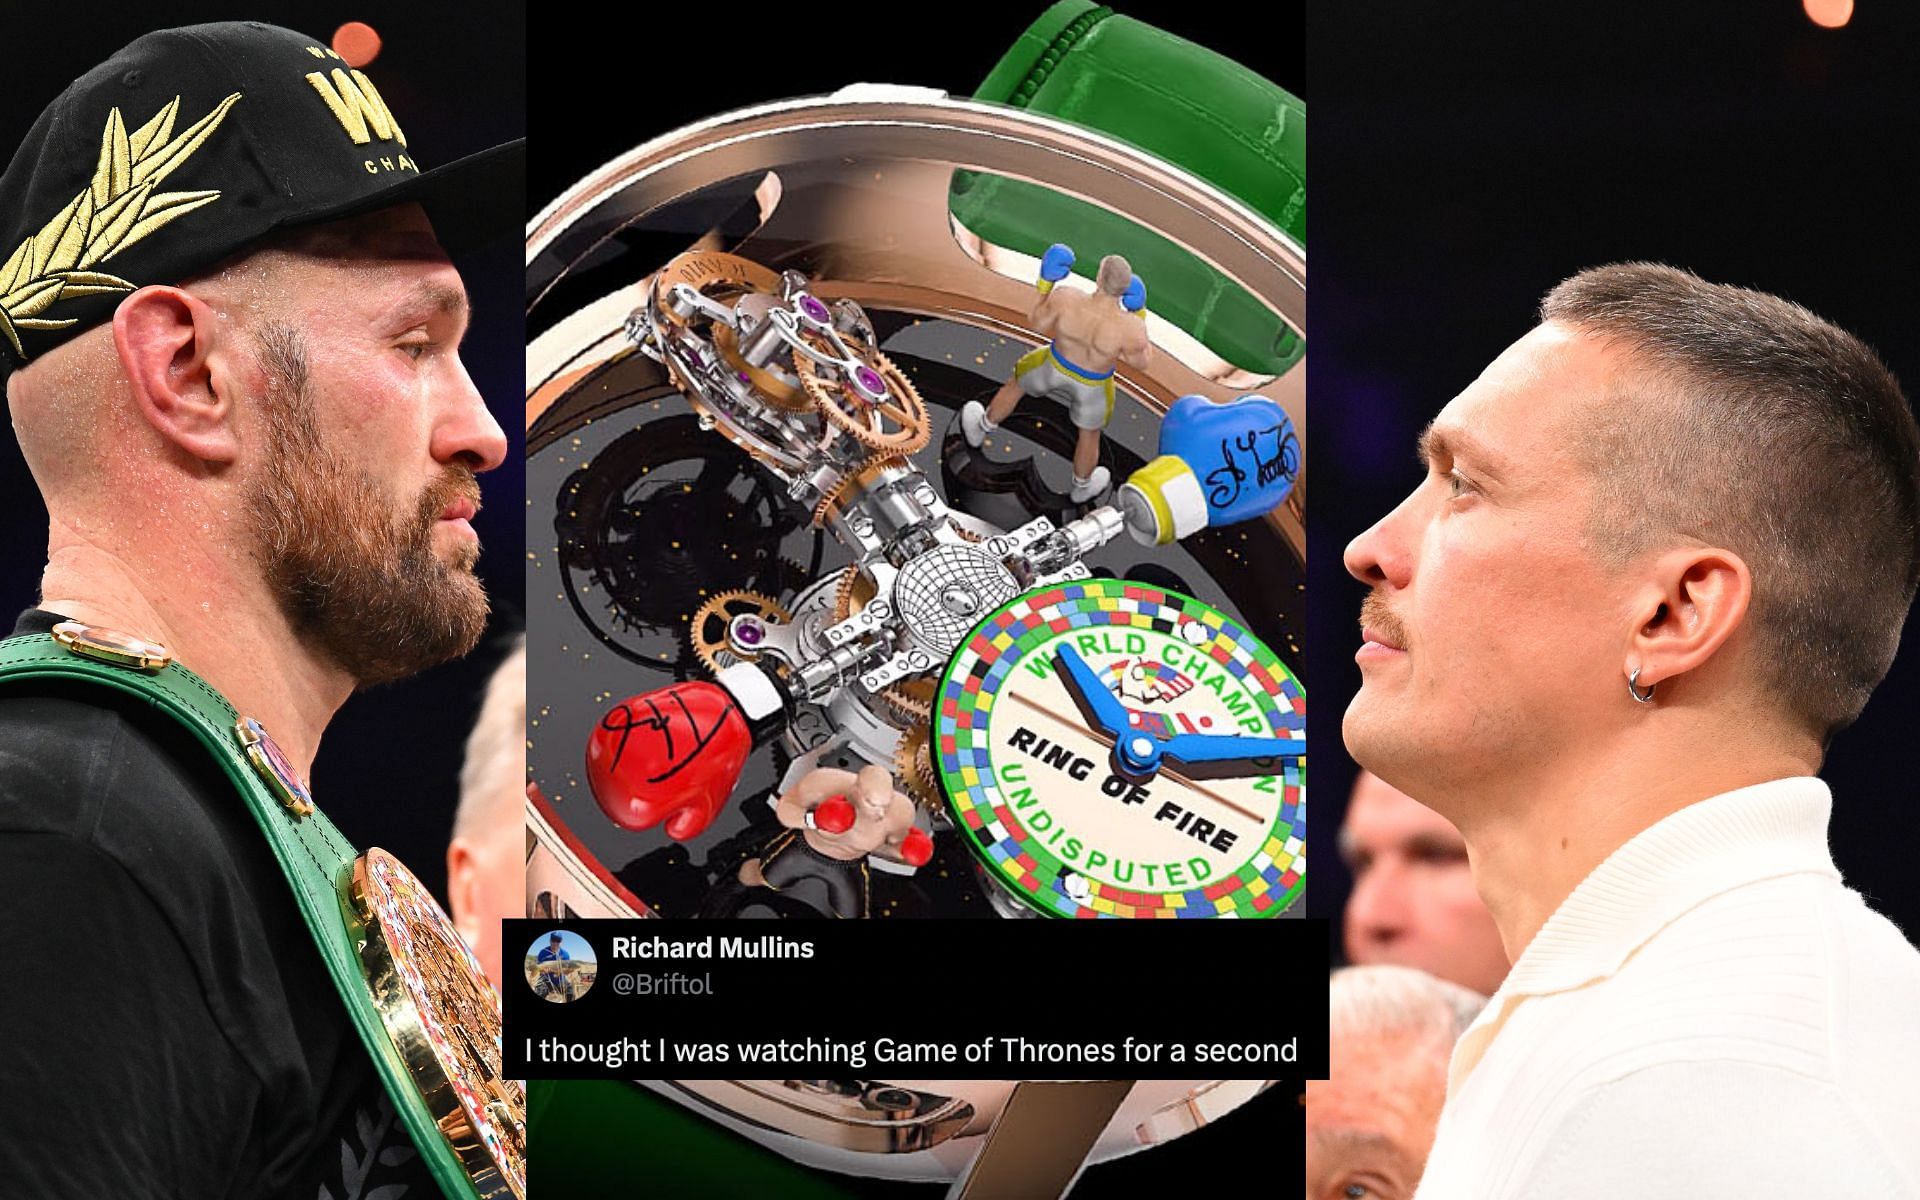 Tyson Fury (left) and Oleksandr Usyk will have a special watch for their matchup. [via Getty Images and WatchPro]